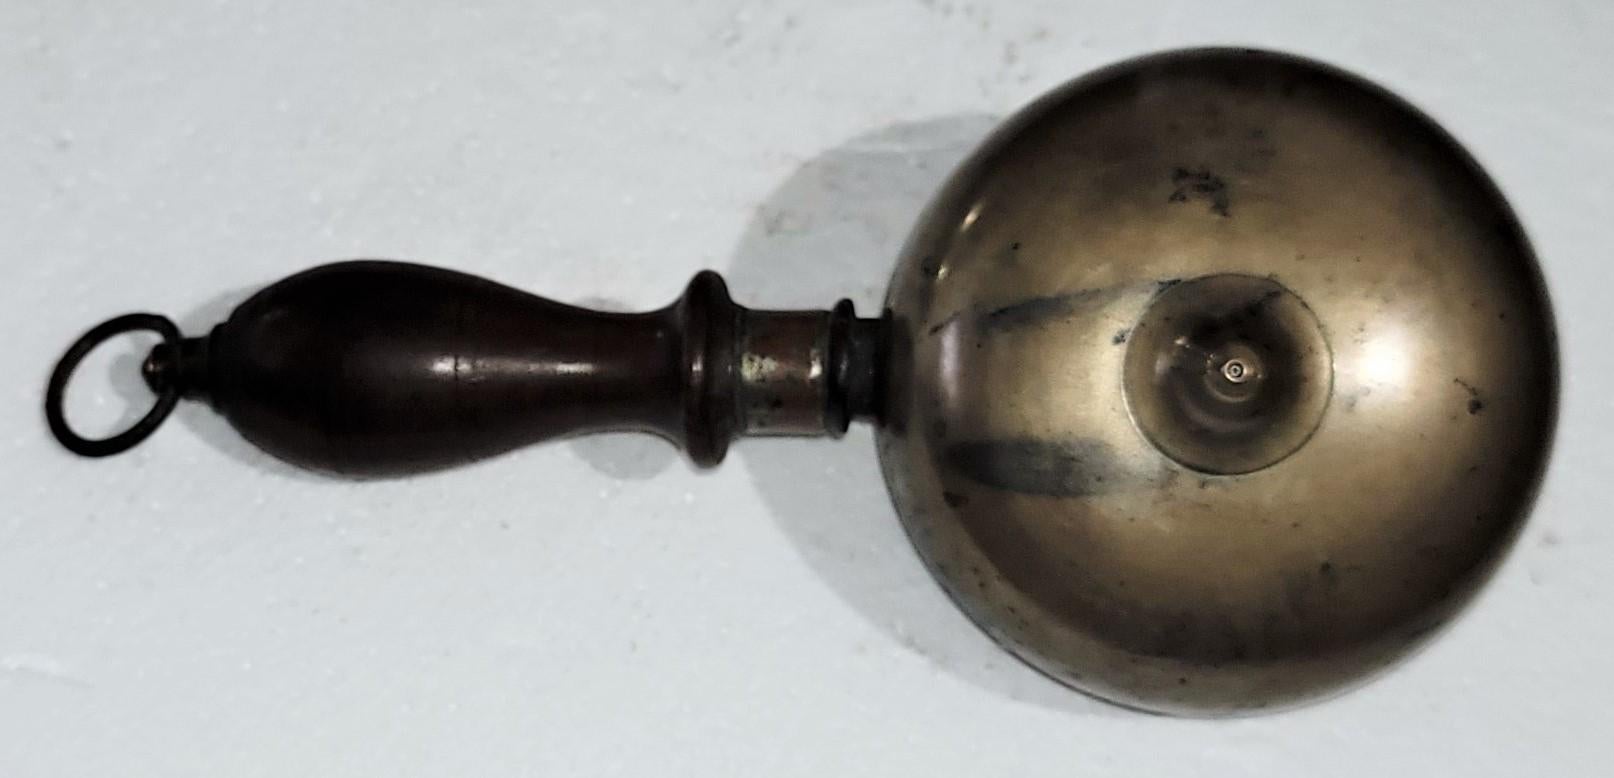 Rare 19th C handheld muffin bell town crier fire alarm bell. The bell features two Brass domes mounted back to back with iron, a turned wood handle, and a brass ring. The bell was commonly used as a fire alarm to alert the town. Usually two Criers